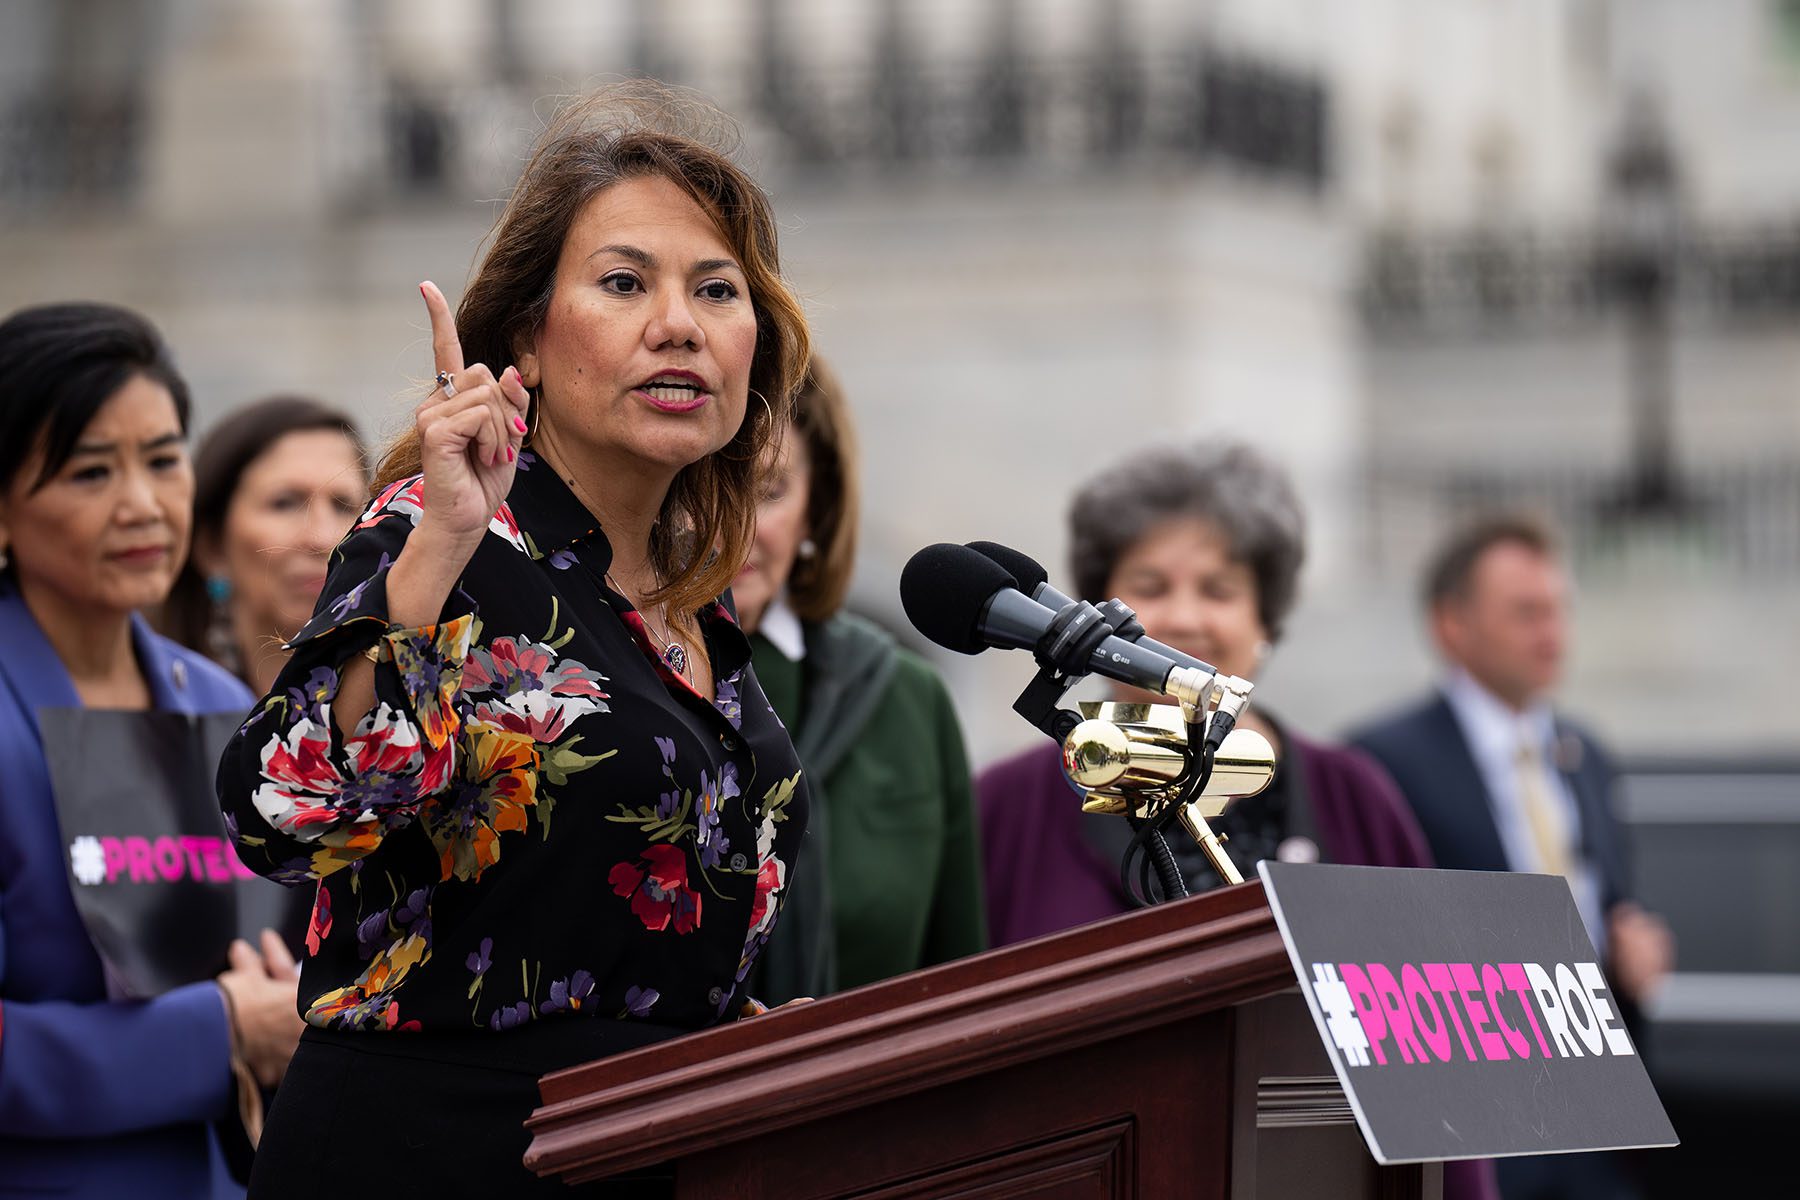 Rep. Veronica Escobar speaks on the steps of the Capitol.